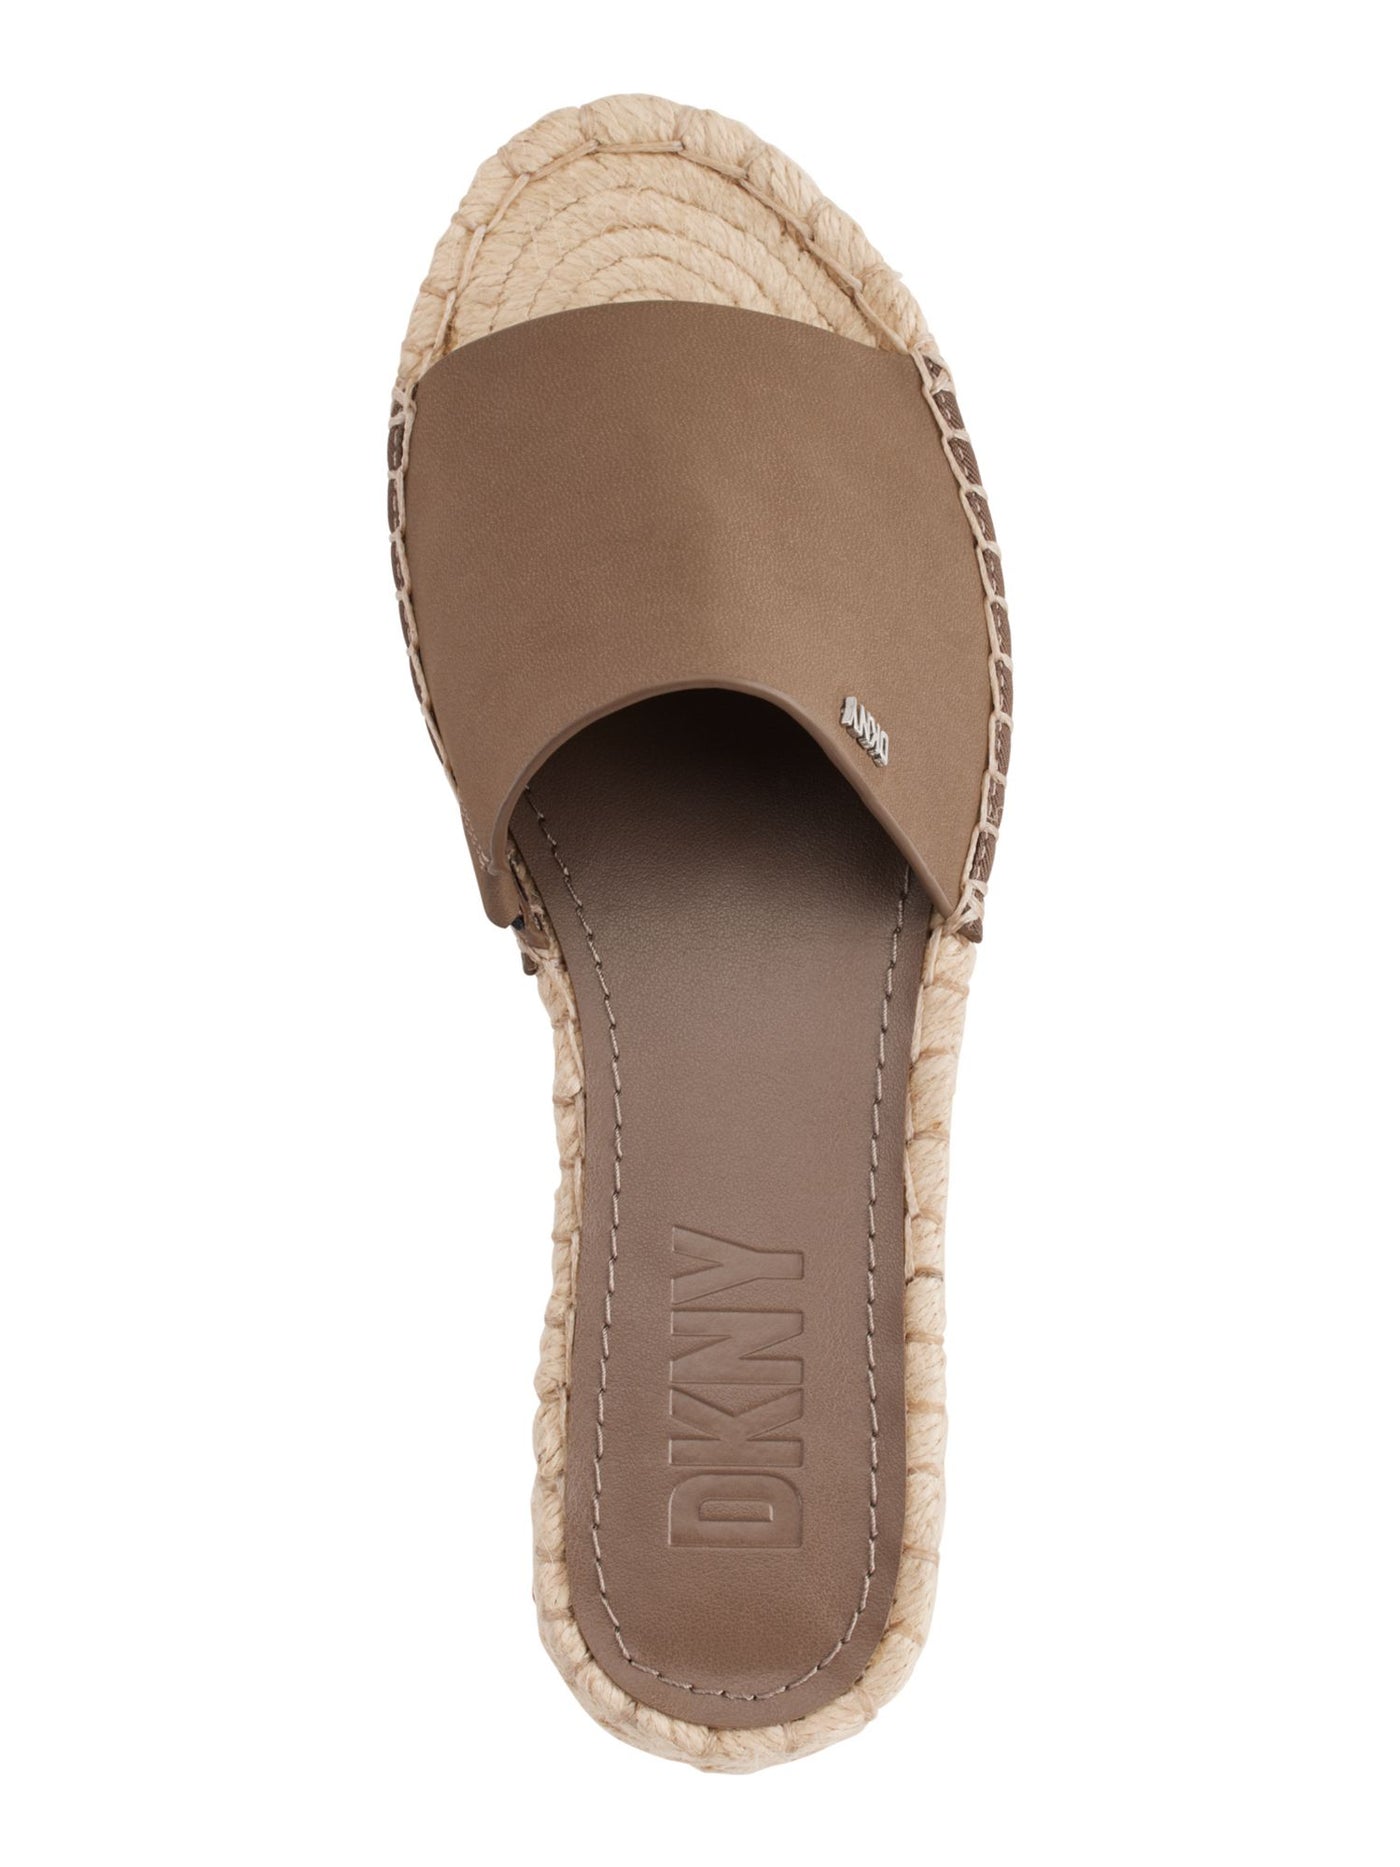 DKNY Womens Brown Padded Camillo Round Toe Platform Slide Espadrille Shoes 11 M